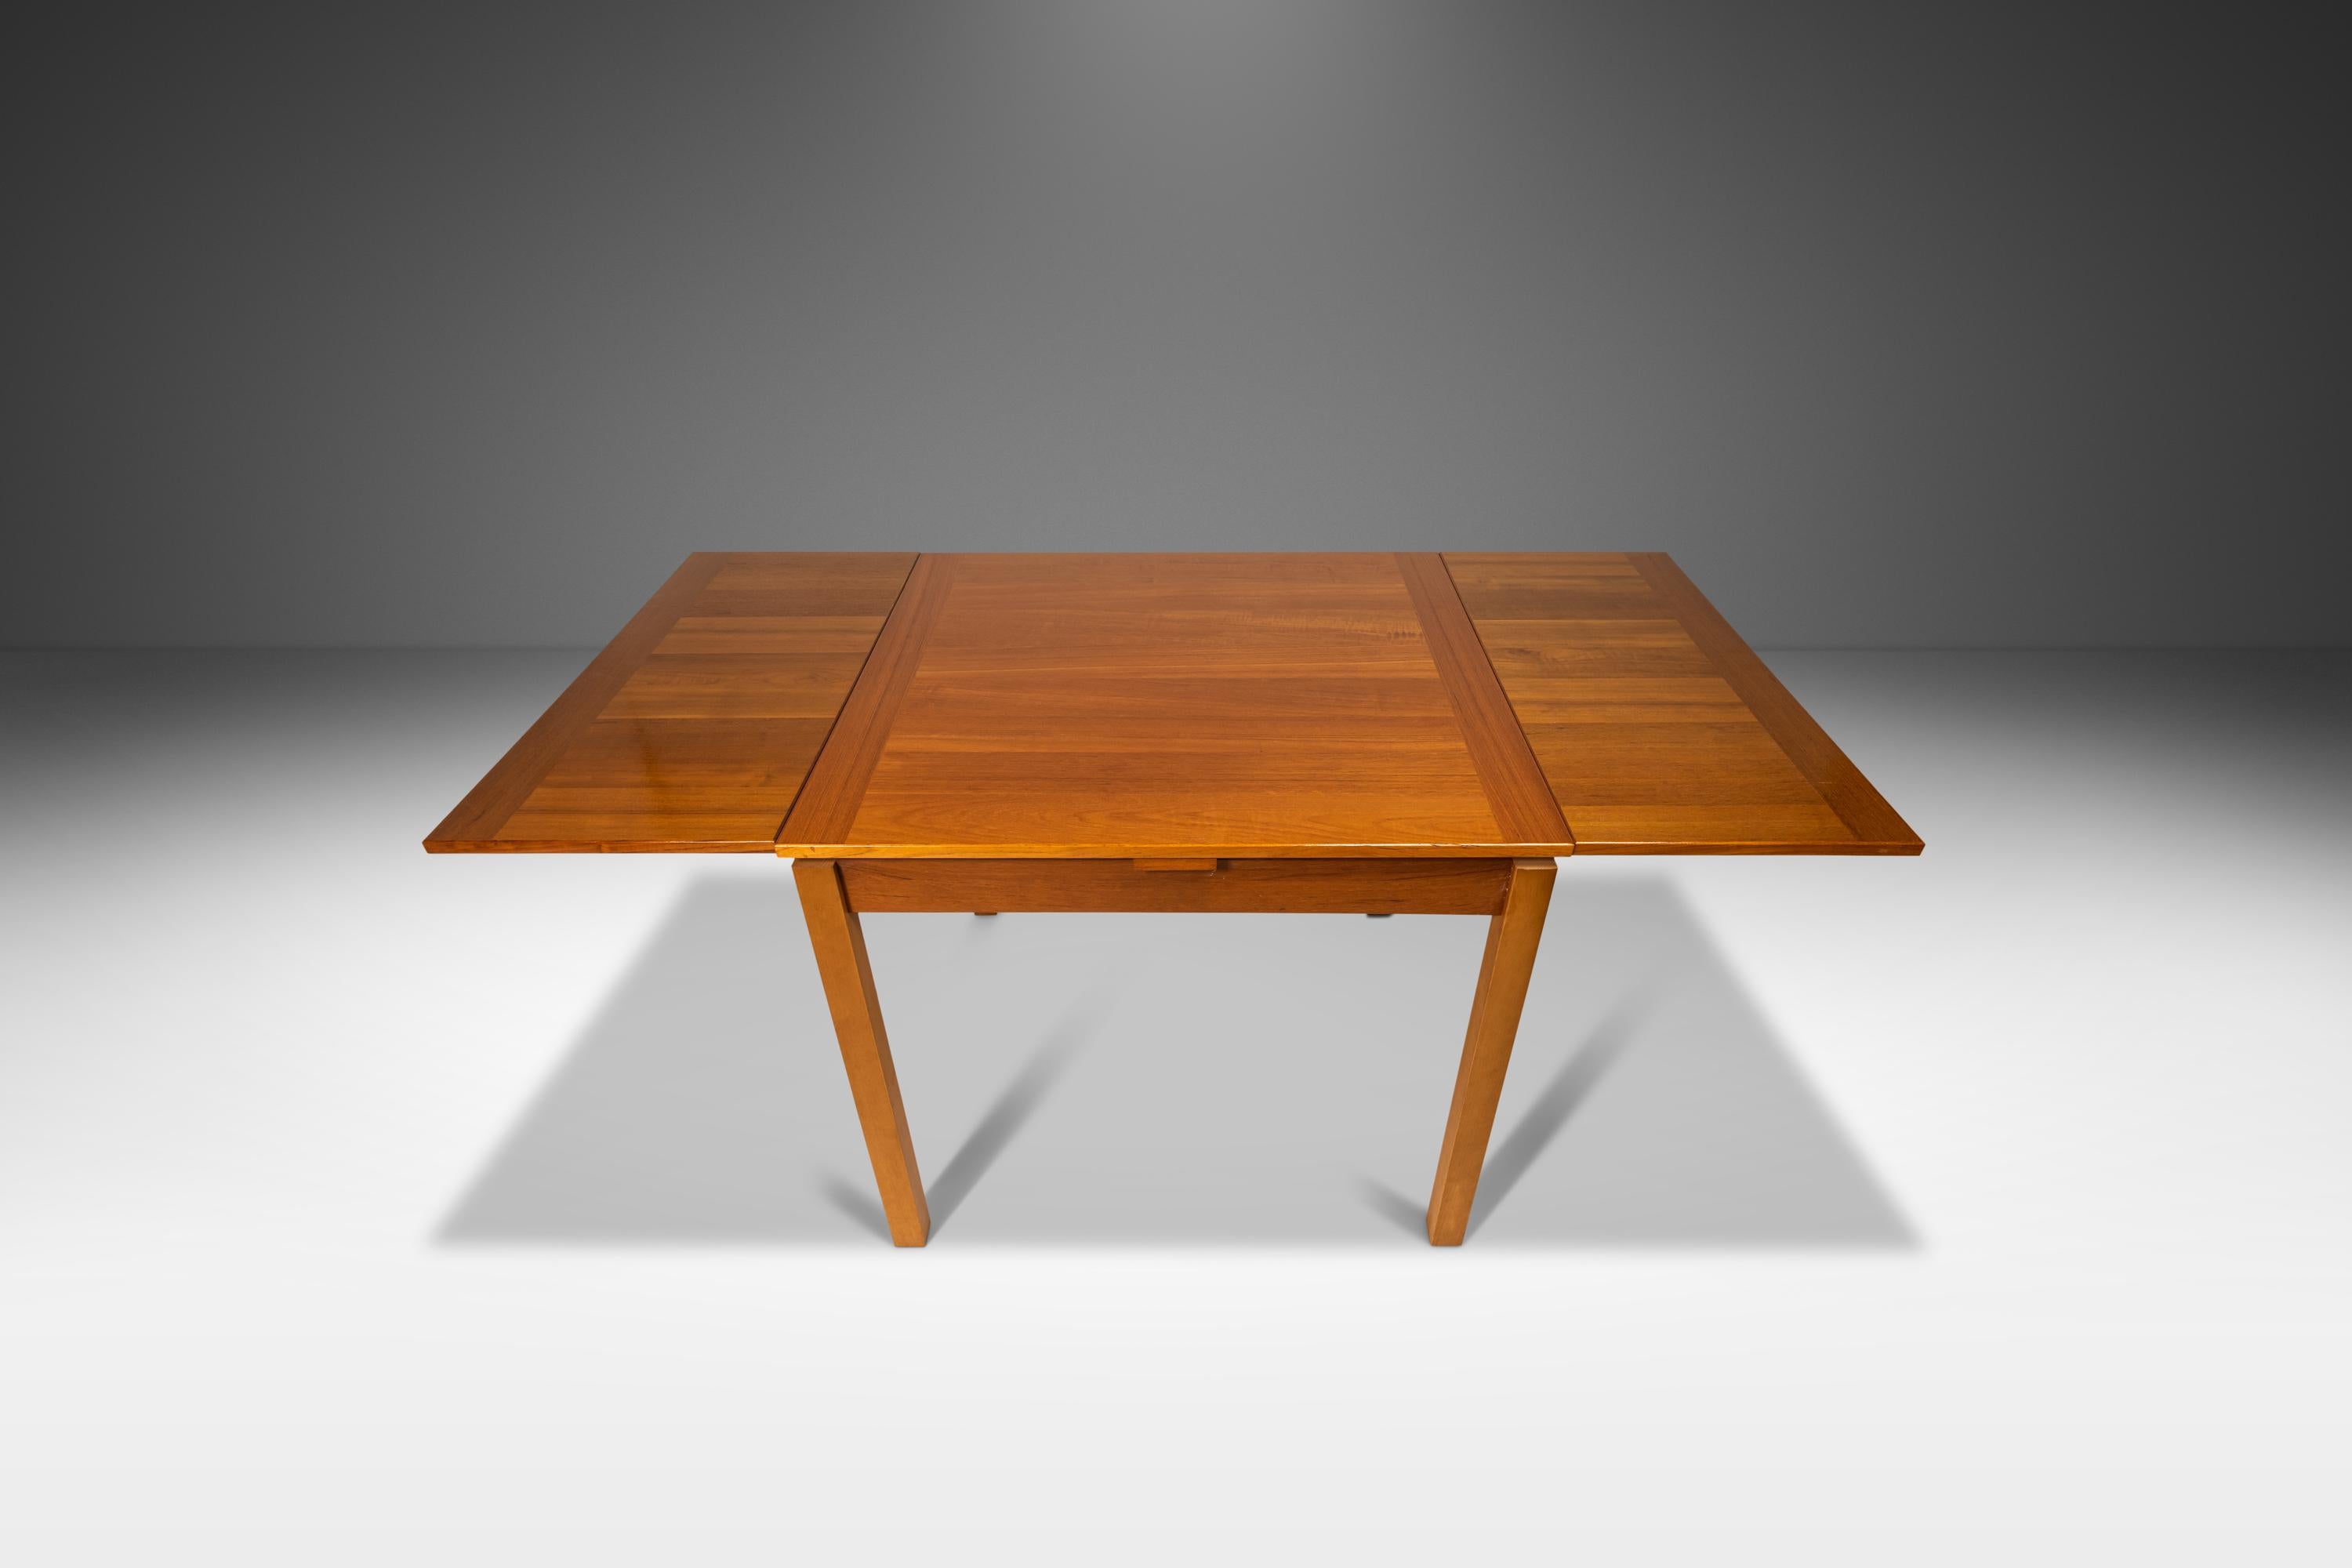 Late 20th Century Danish Modern Expansion Dining Table in Teak by Ansager Møbler, Denmark, c. 1980 For Sale